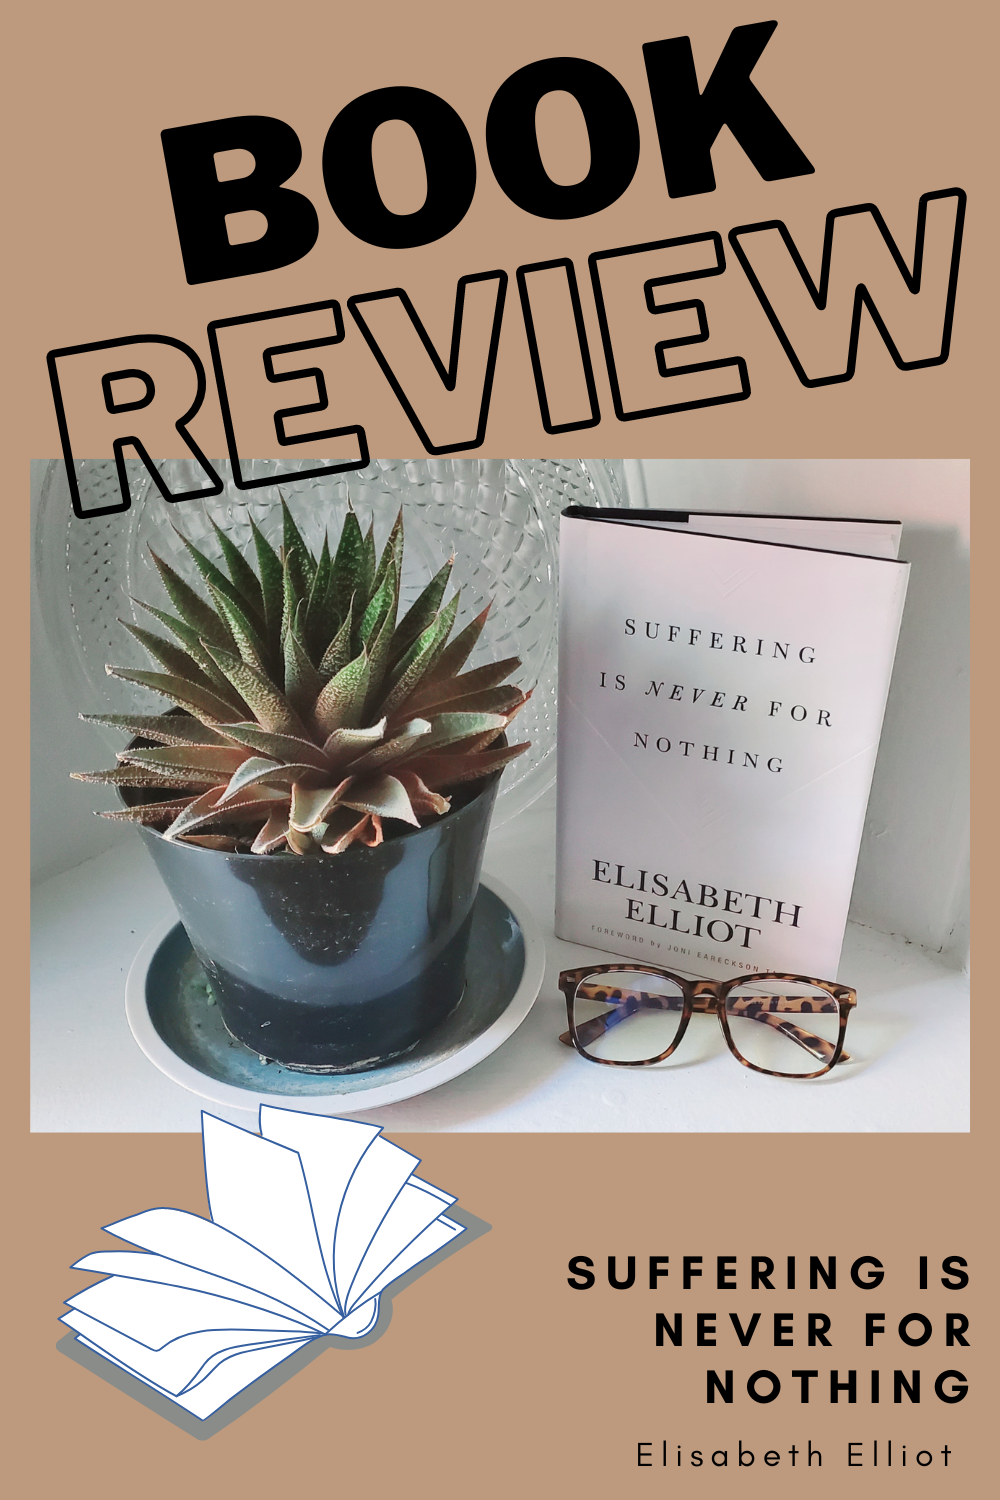 Book Review: Suffering is Never for Nothing by Elisabeth Elliot